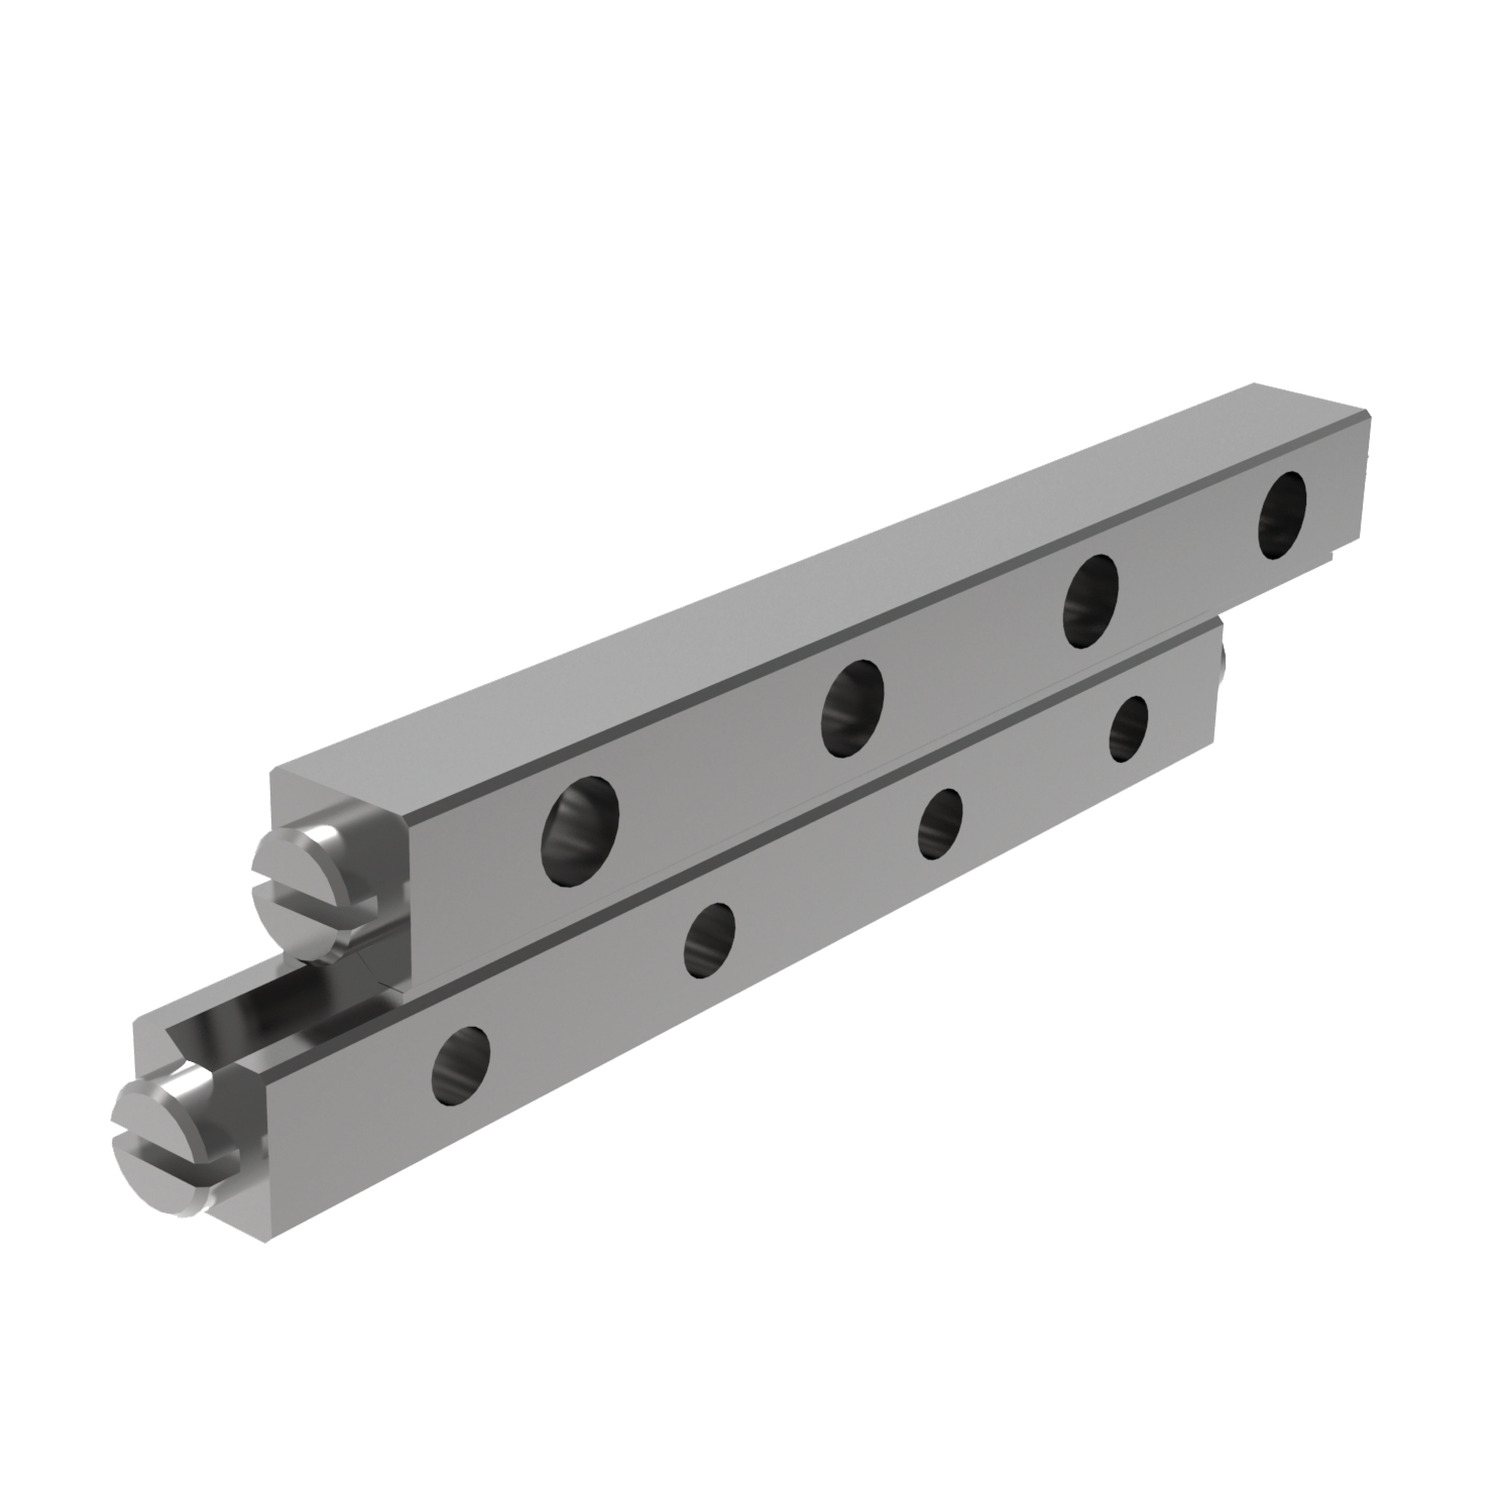 L1001 - Stainless Crossed Roller Rail Sets